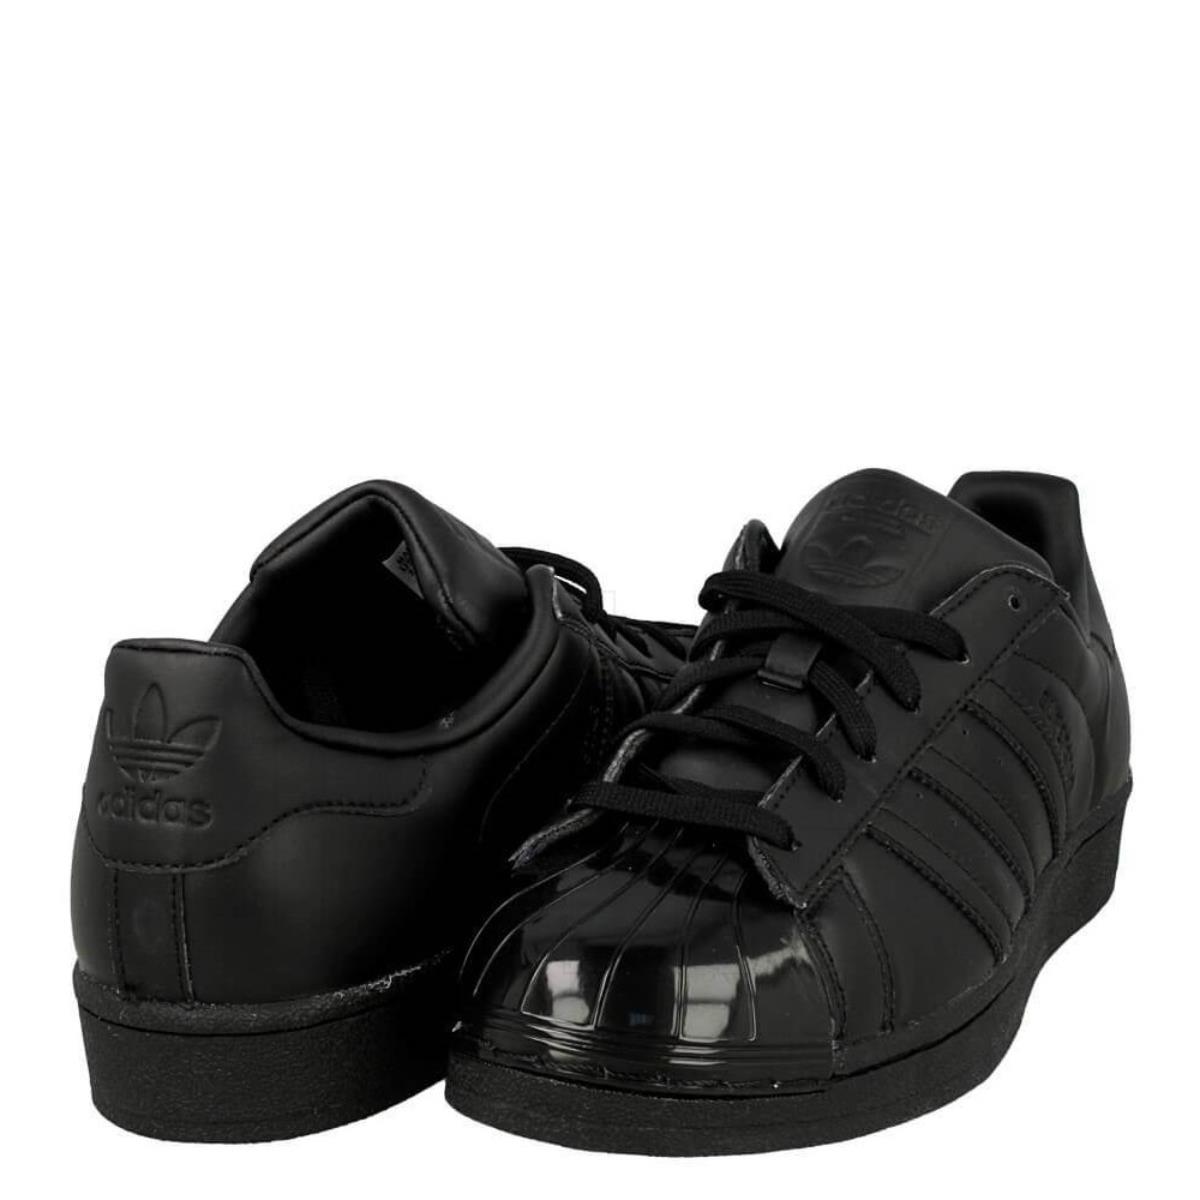 adidas nere lucide